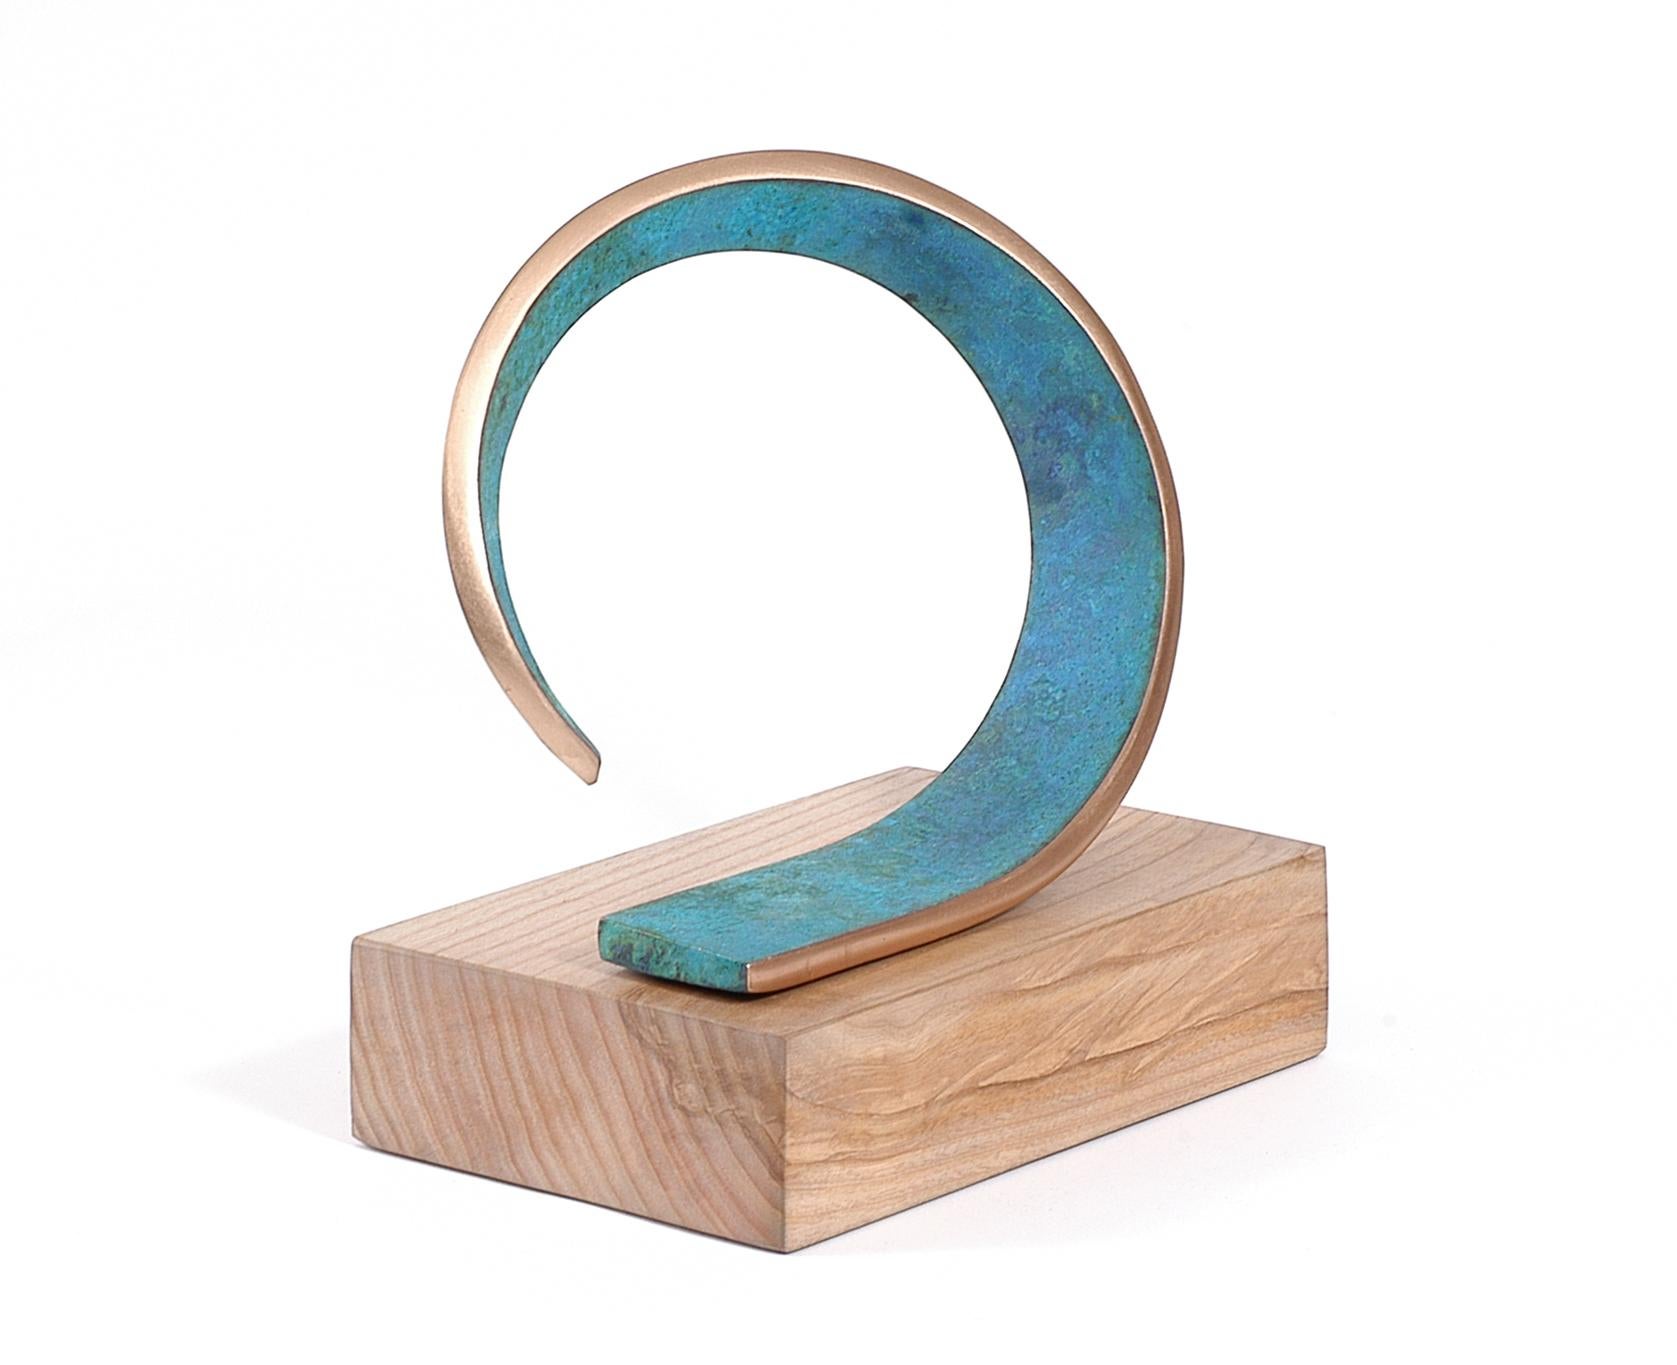 British Contemporary Sculpture by Philip Hearsey - Dreaming of Summer